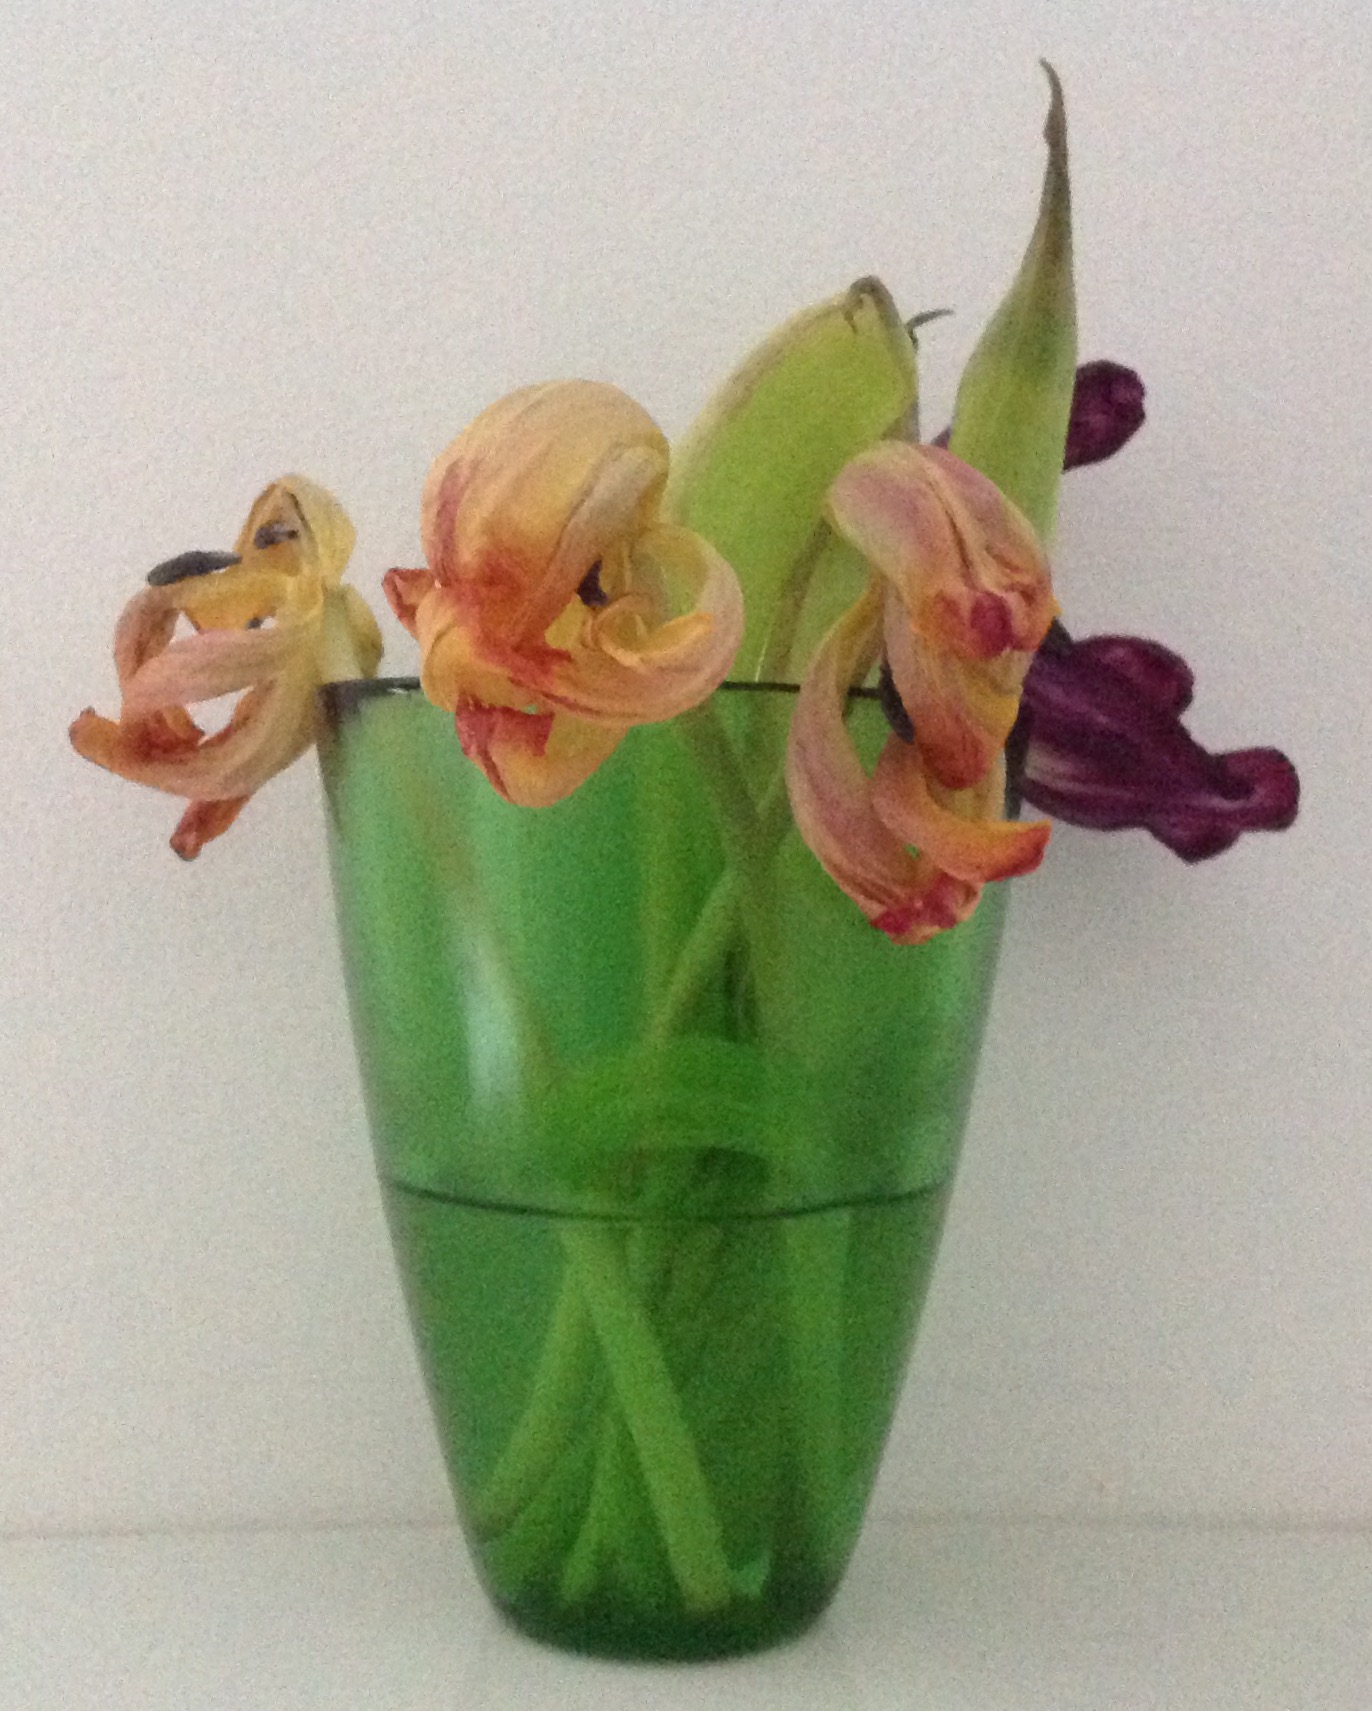 This image is of a small green vase, grass-green and made of thick glass which slightly tapers top to bottom. Four small tulips stand in water, three with fading orange petals, one with purple. All are in the stage just before the petals, which seem to be curling in on themselves, fall off. A few stamen are visible, like tiny black tongues.